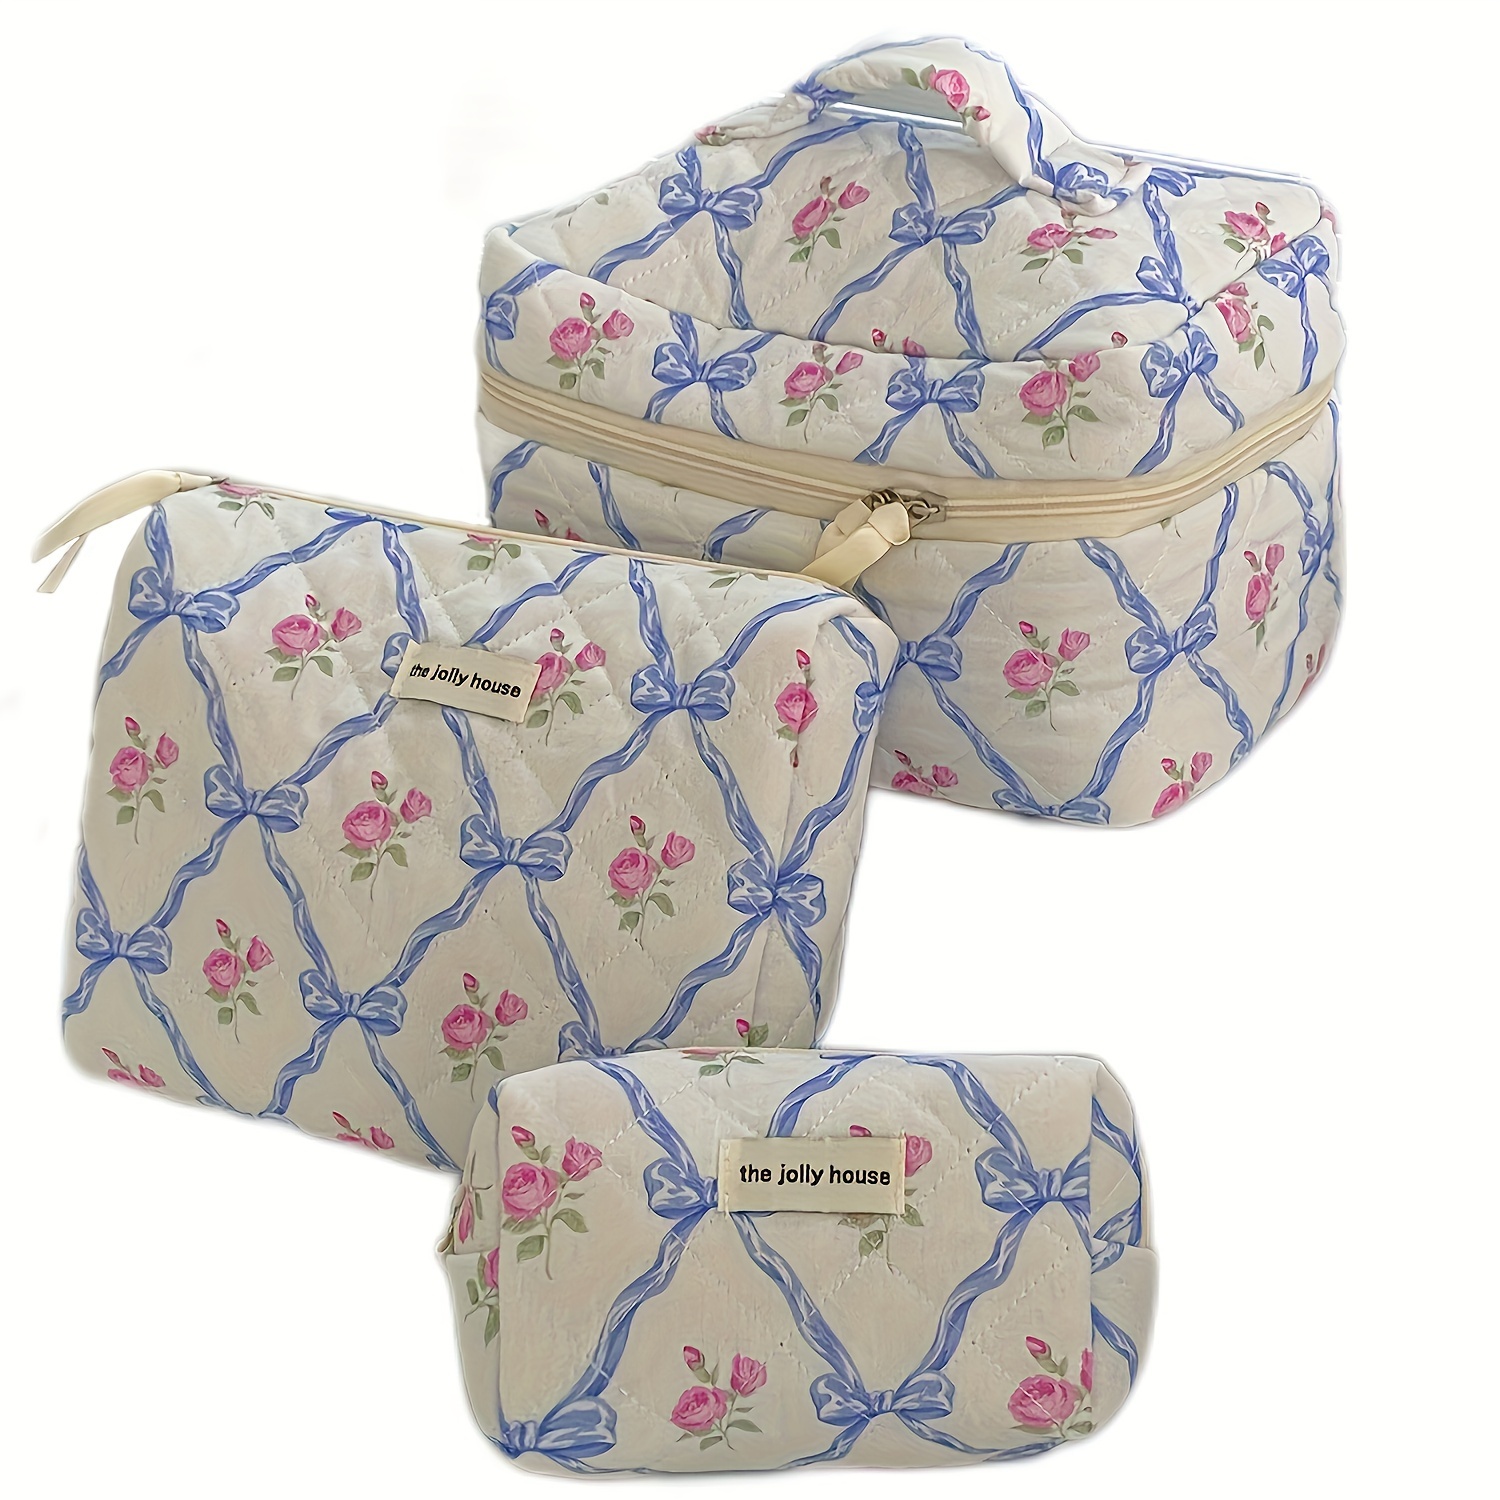 

Jolly House Quilted Bow And Flower Makeup Bags - Cotton, Gender: Female, Waterproof: No, Low Allergenic